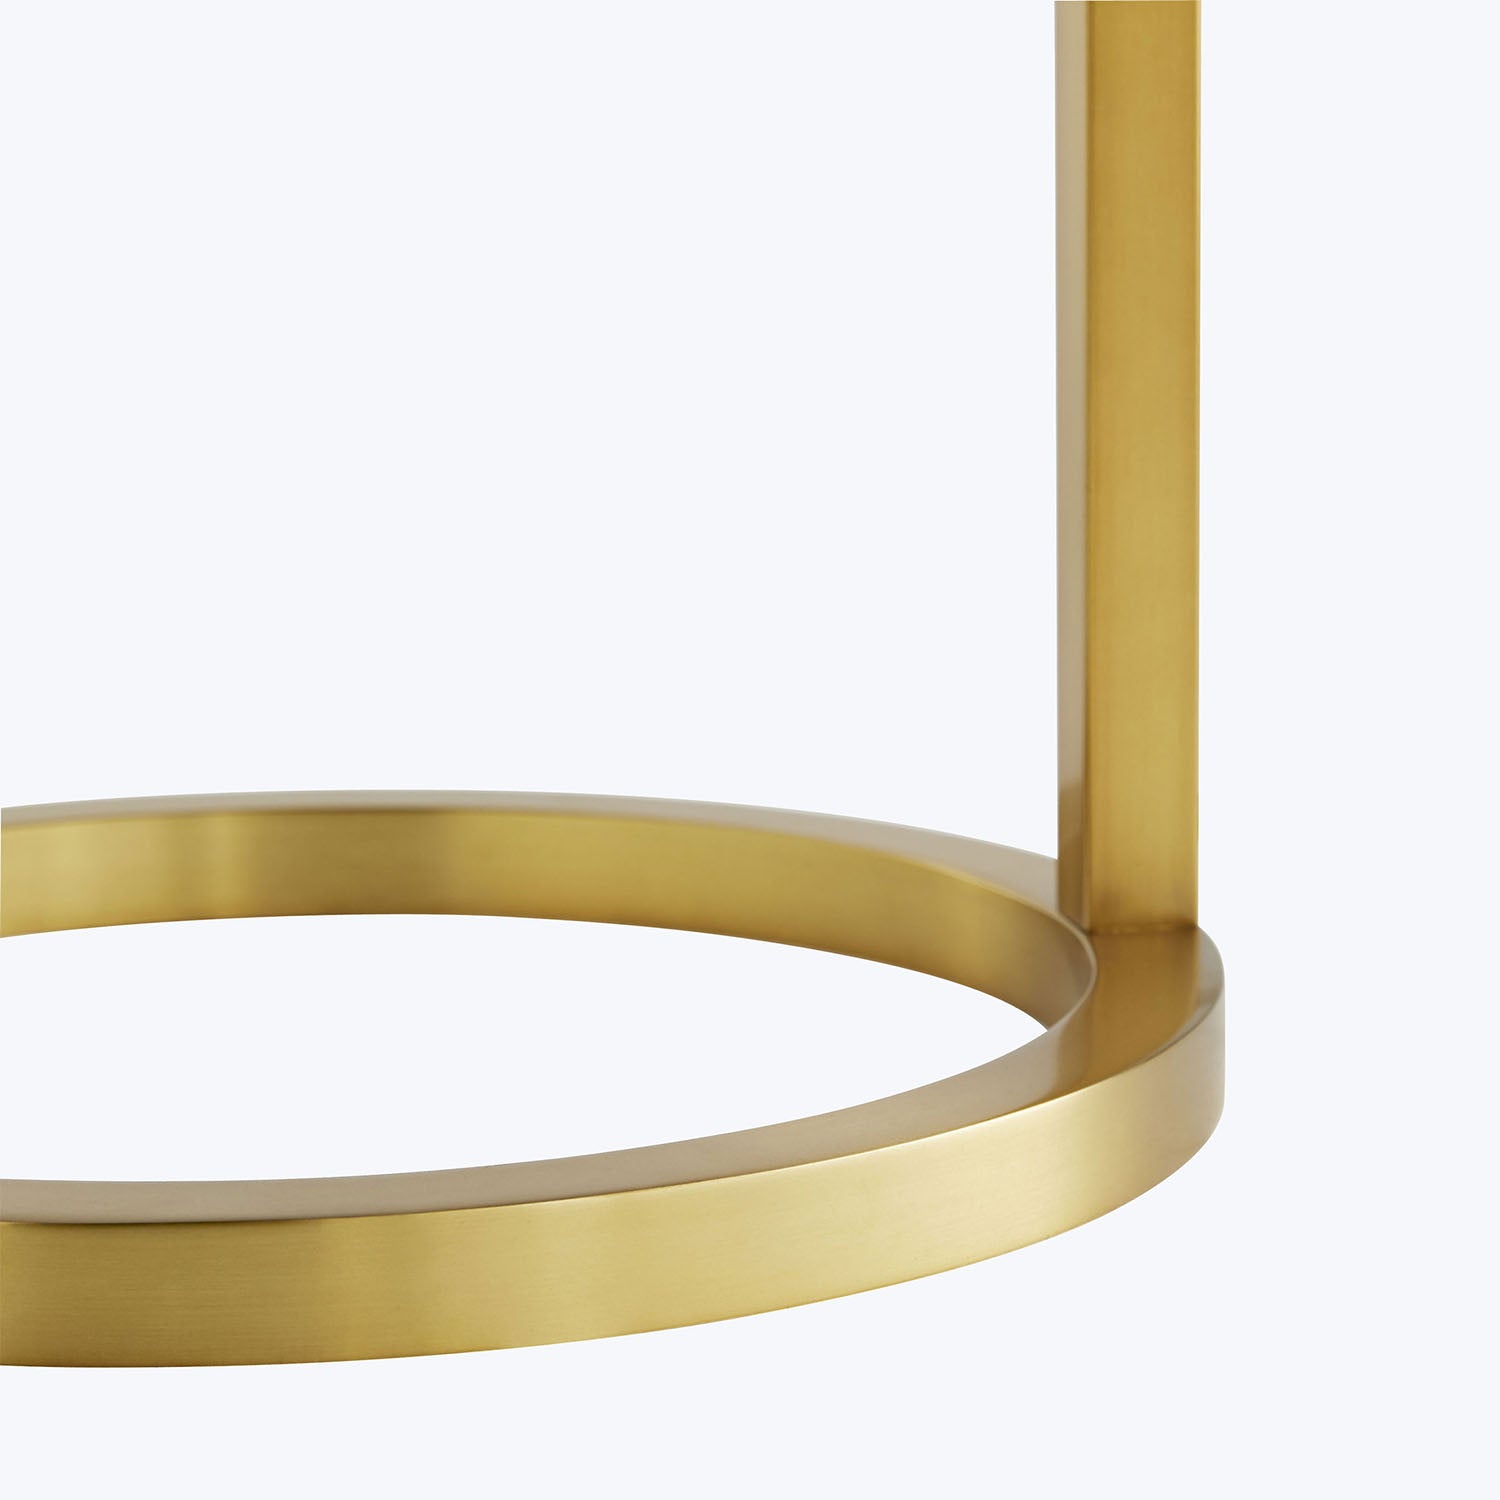 Golden circular structure connected to vertical rod, minimal and modern design.